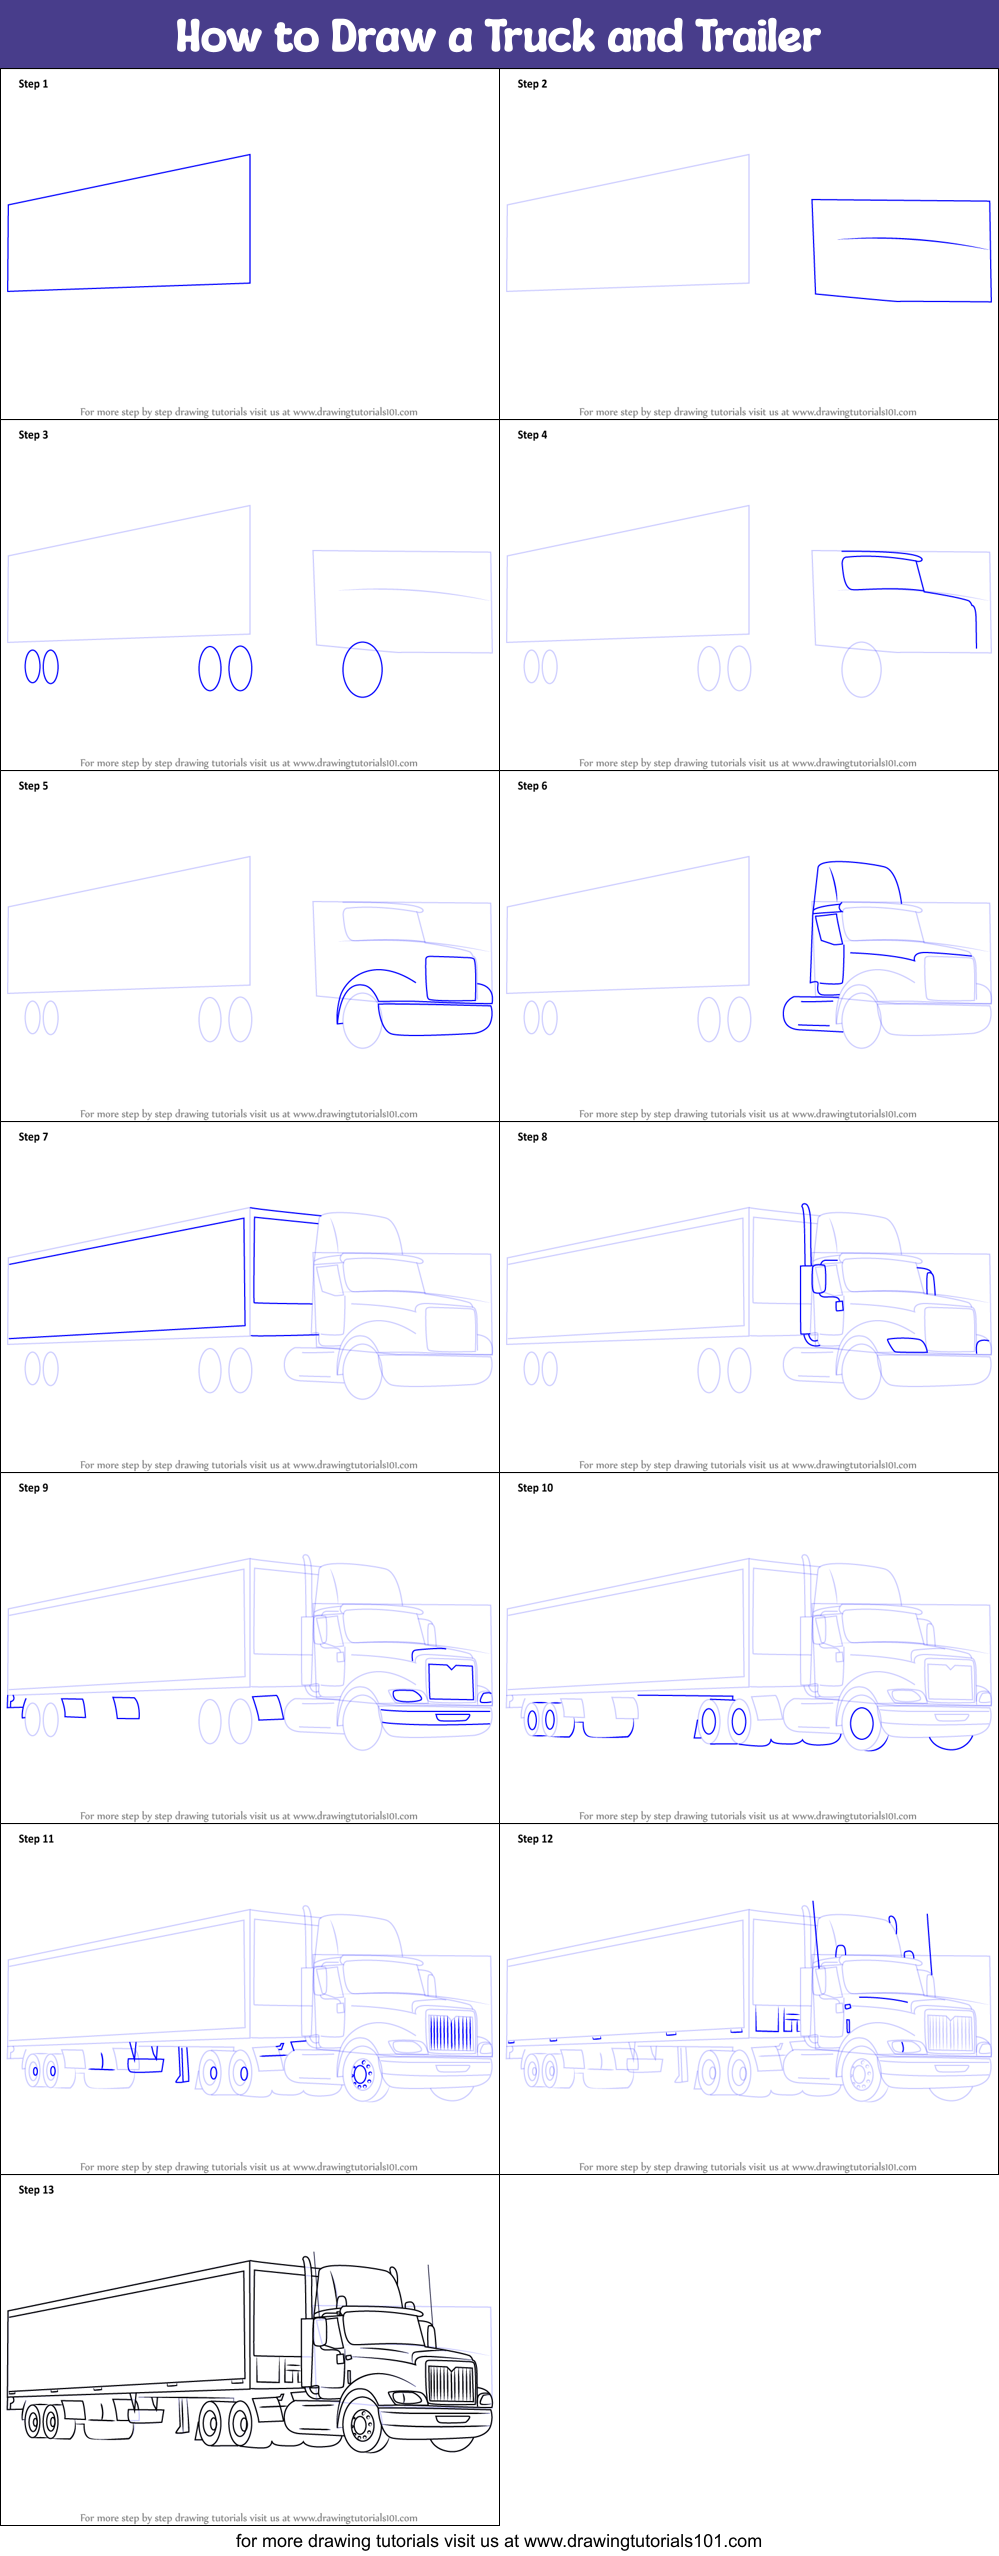 Amazing How To Draw A Trailer Step By Step of all time Check it out now 